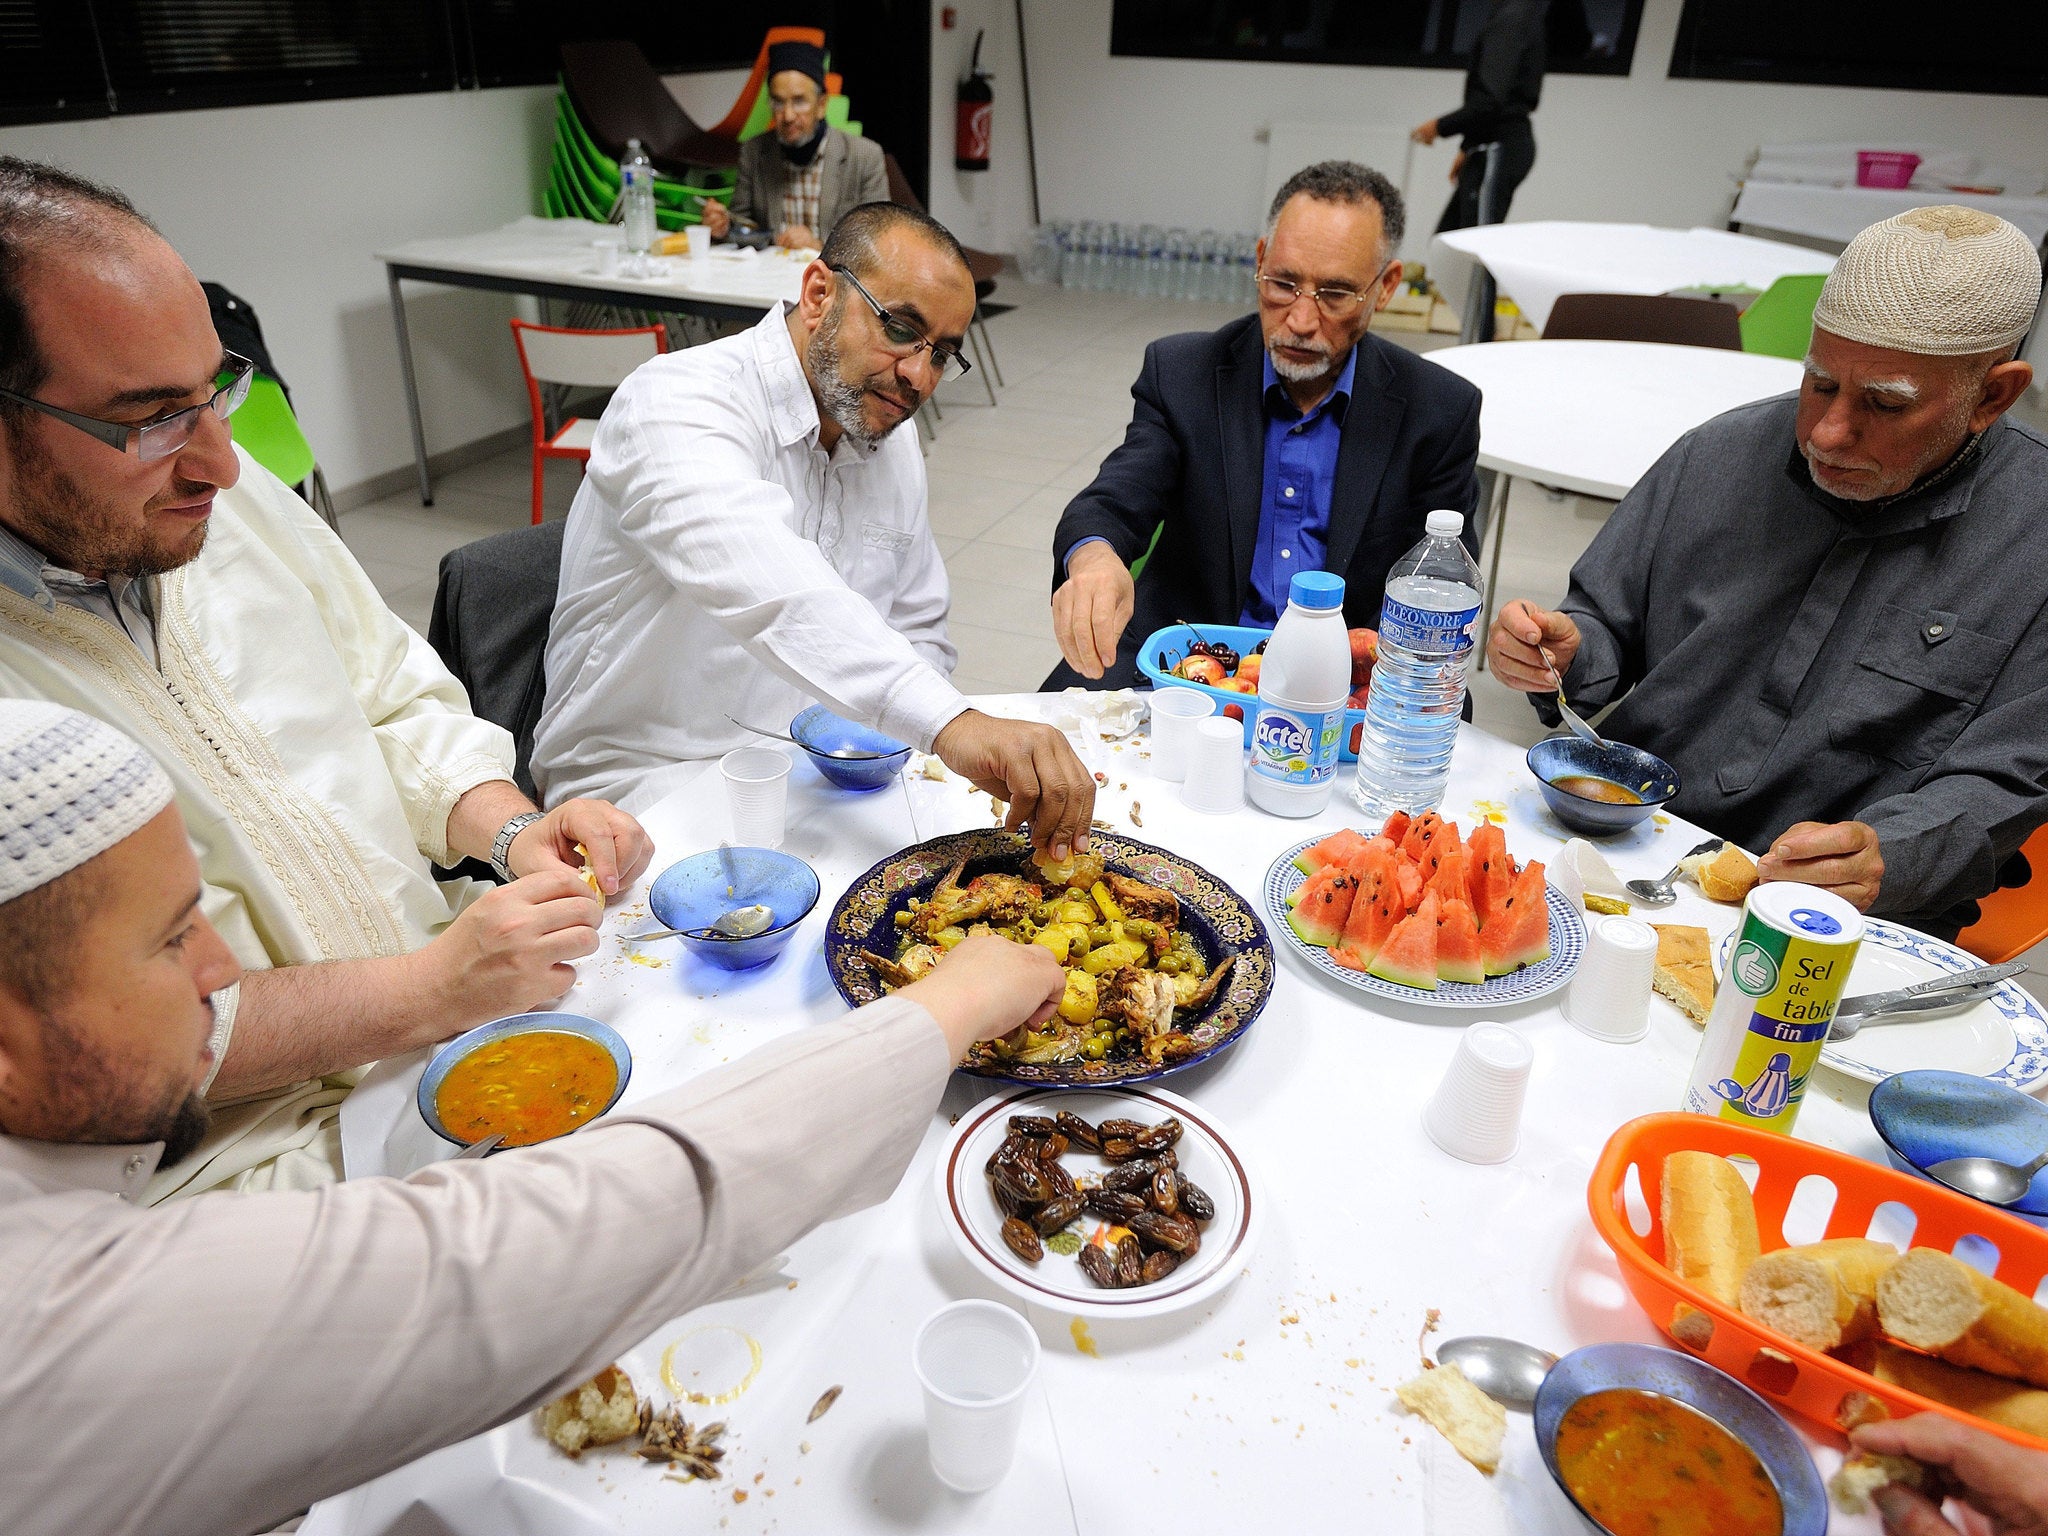 Muslim faithfuls eat dinner at Assalam Mosque on June 28, 2014 in Nantes, western France, on the eve the first day of Ramadan (credit: Jean-Sebastien Evrard/ Getty)